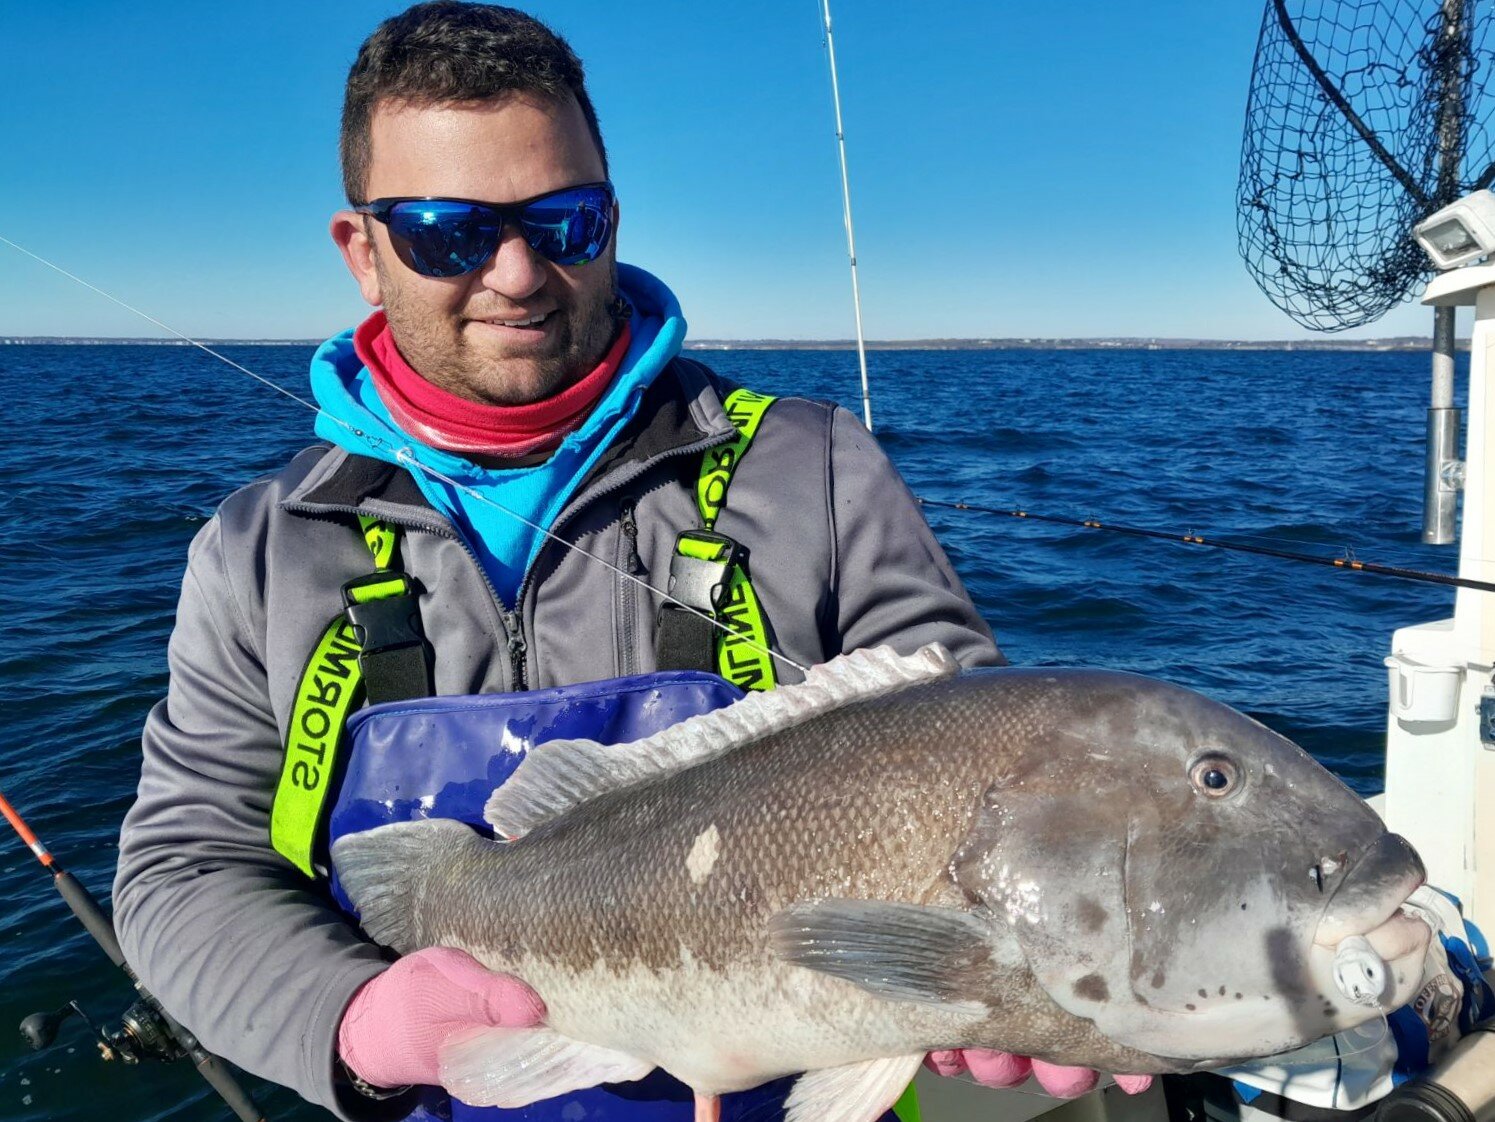 “Capt. Kurt Rivard of K & M Coastal Charters caught this 14-pound tautog last week with a jig when fishing off Newport,” said Jeff Sullivan of Lucky Bait & Tackle, Warren.